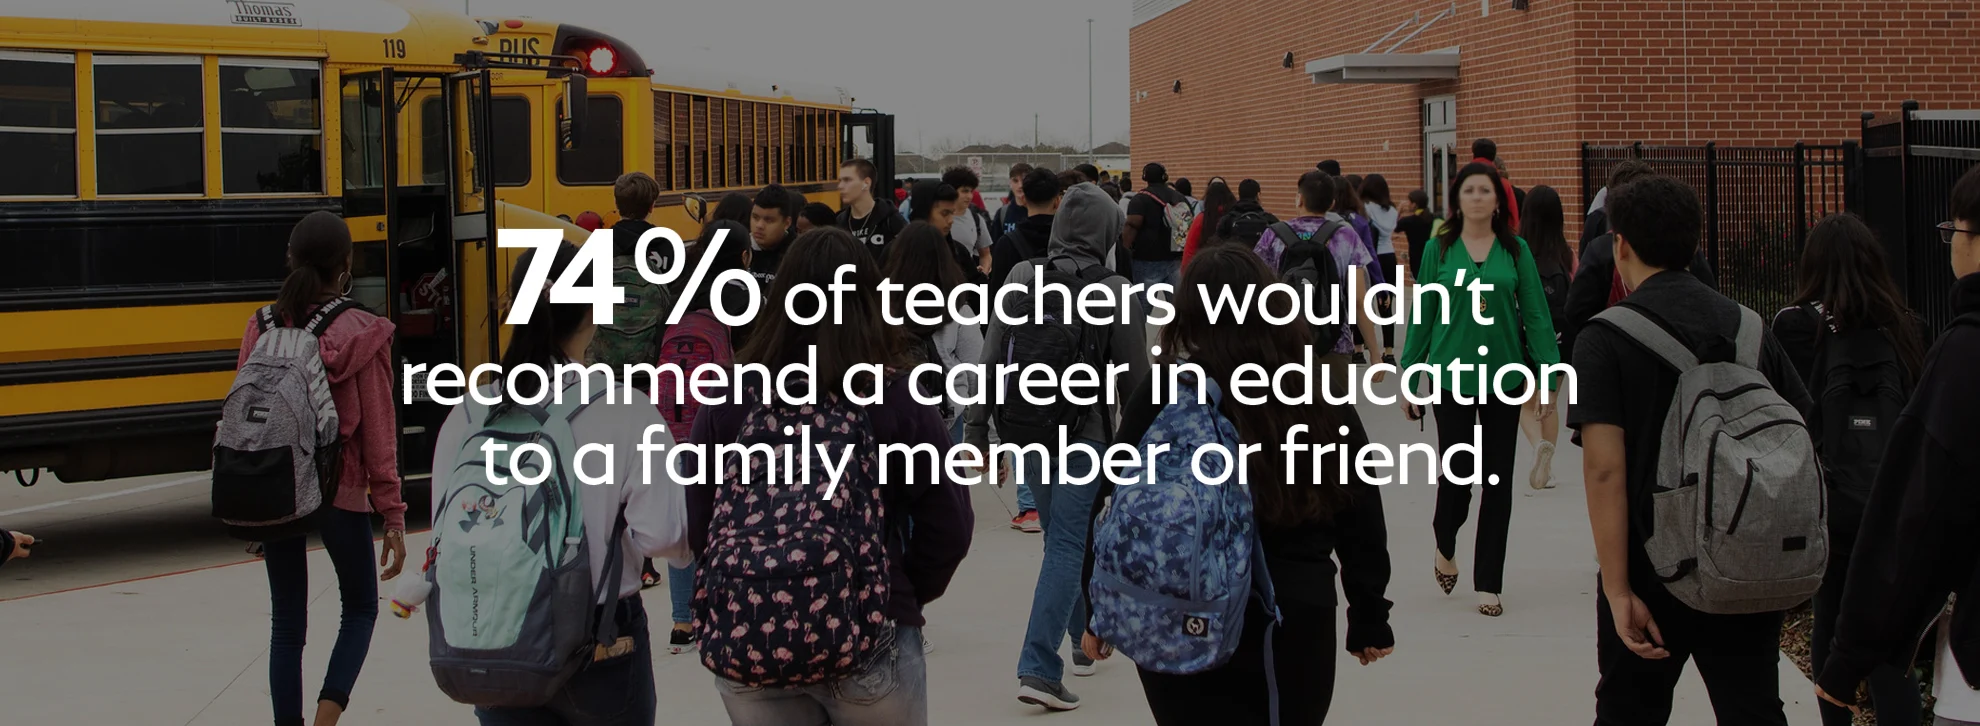 74% of teachers wouldn't recommend a career in education to a family member or friend